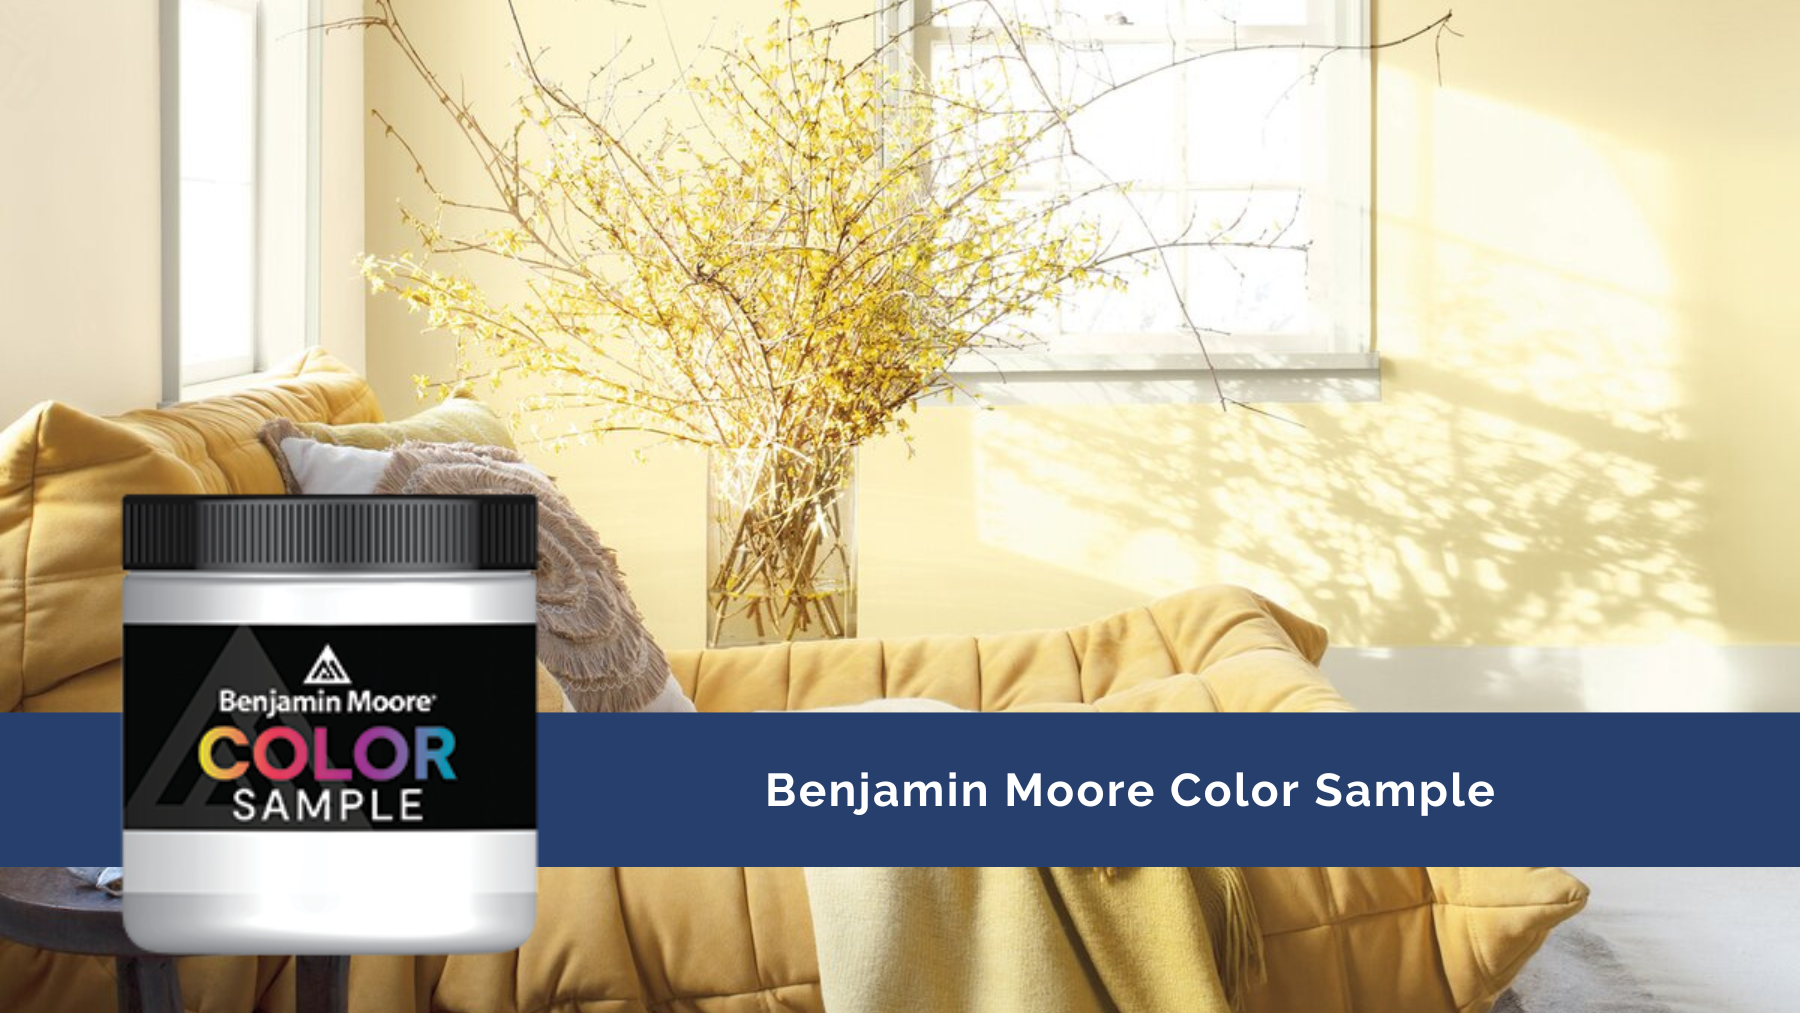 Benjamin Moore Half-Pint Color Samples available at JC Licht